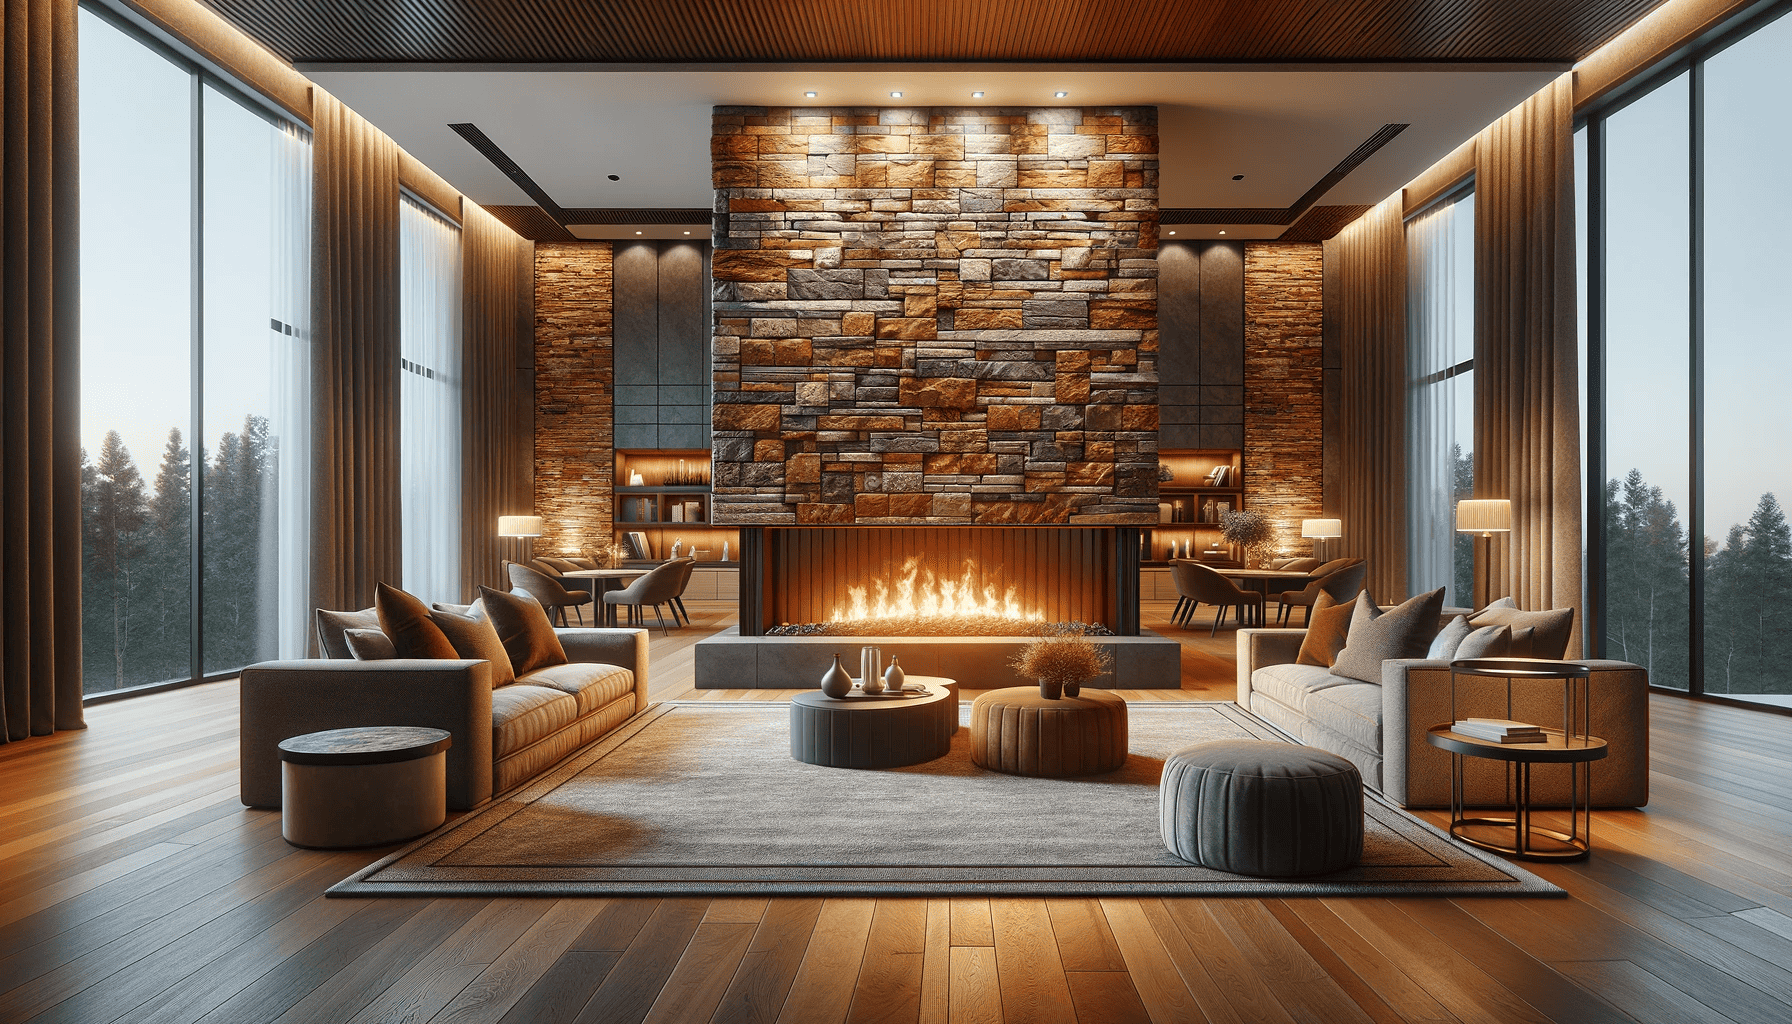 Natural Stone Wall Panels sitting area around fireplace with flooring featuring Reclaimed Wood planks in a smooth finish.